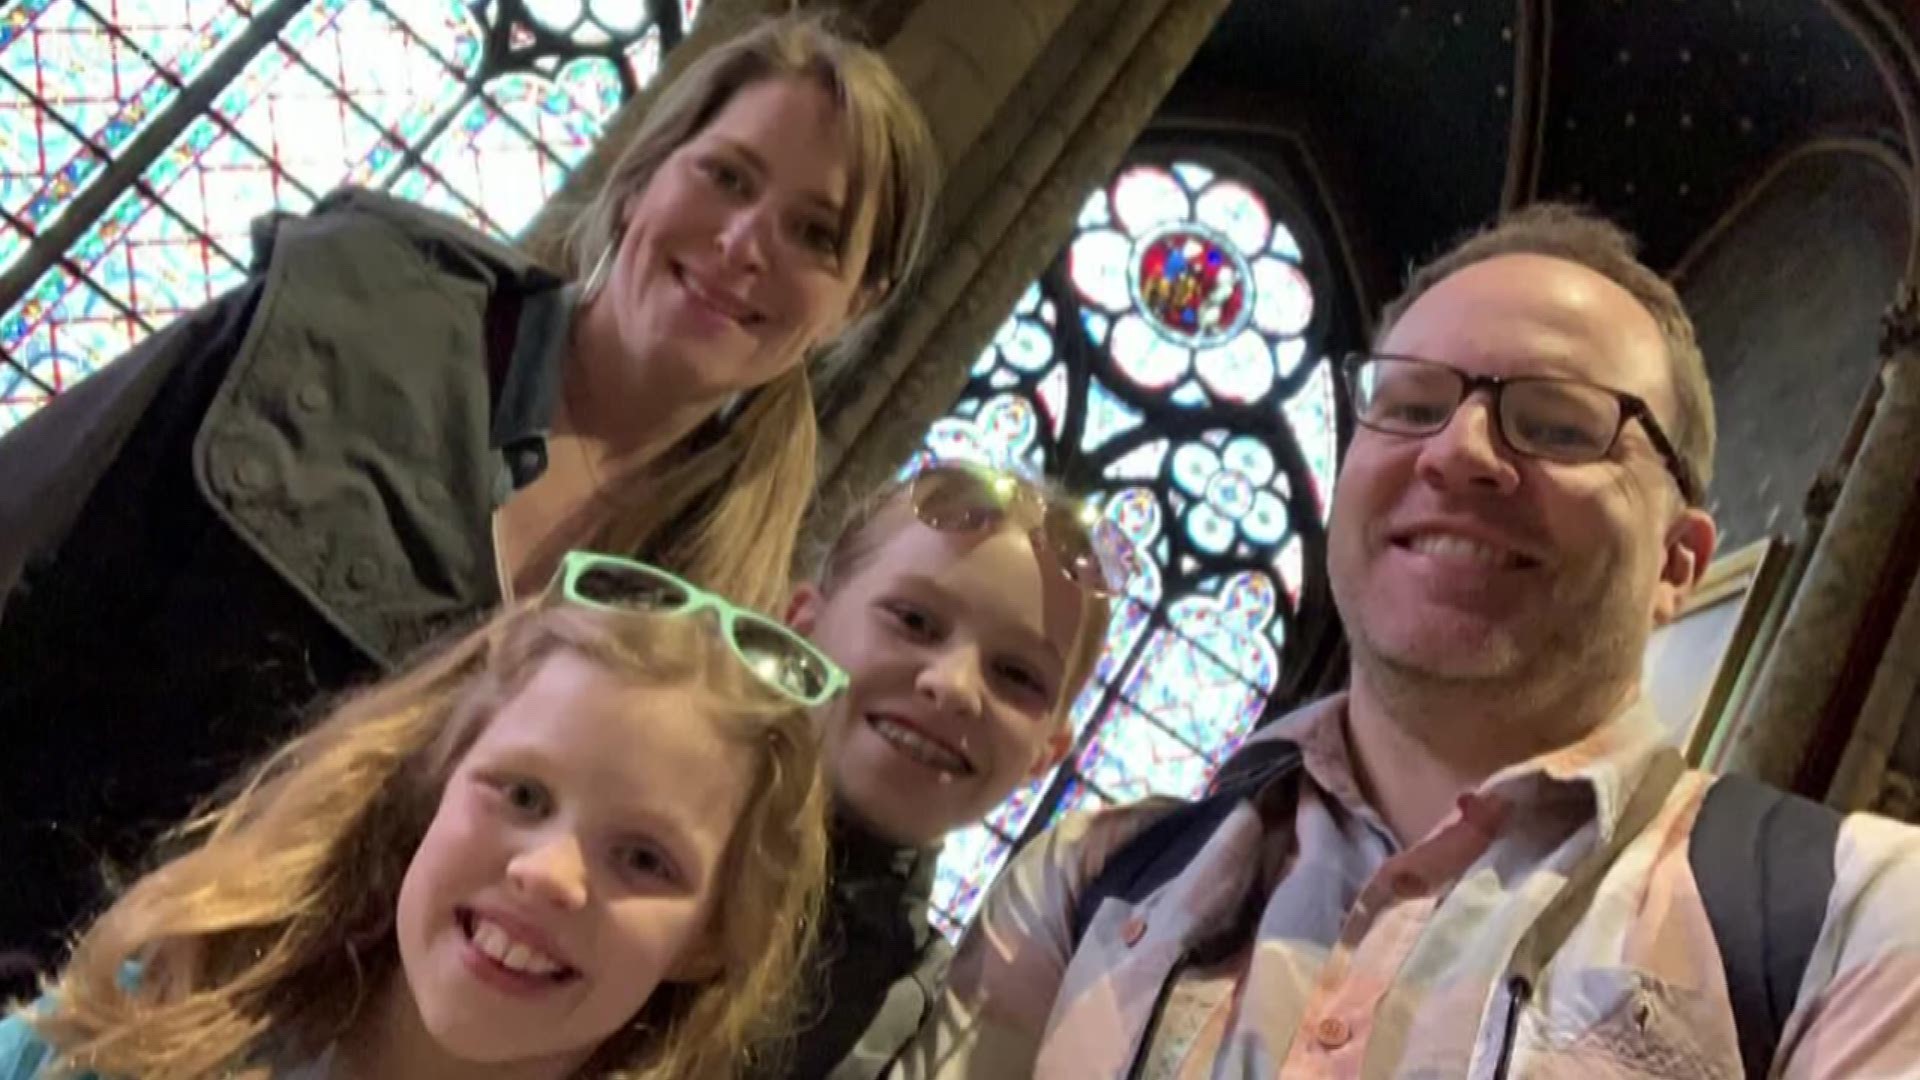 More than 10-million people a year visit Notre Dame. Earlier this month, KING 5's Drew Mikkelsen toured the famous landmark with his family and has some memories to share.